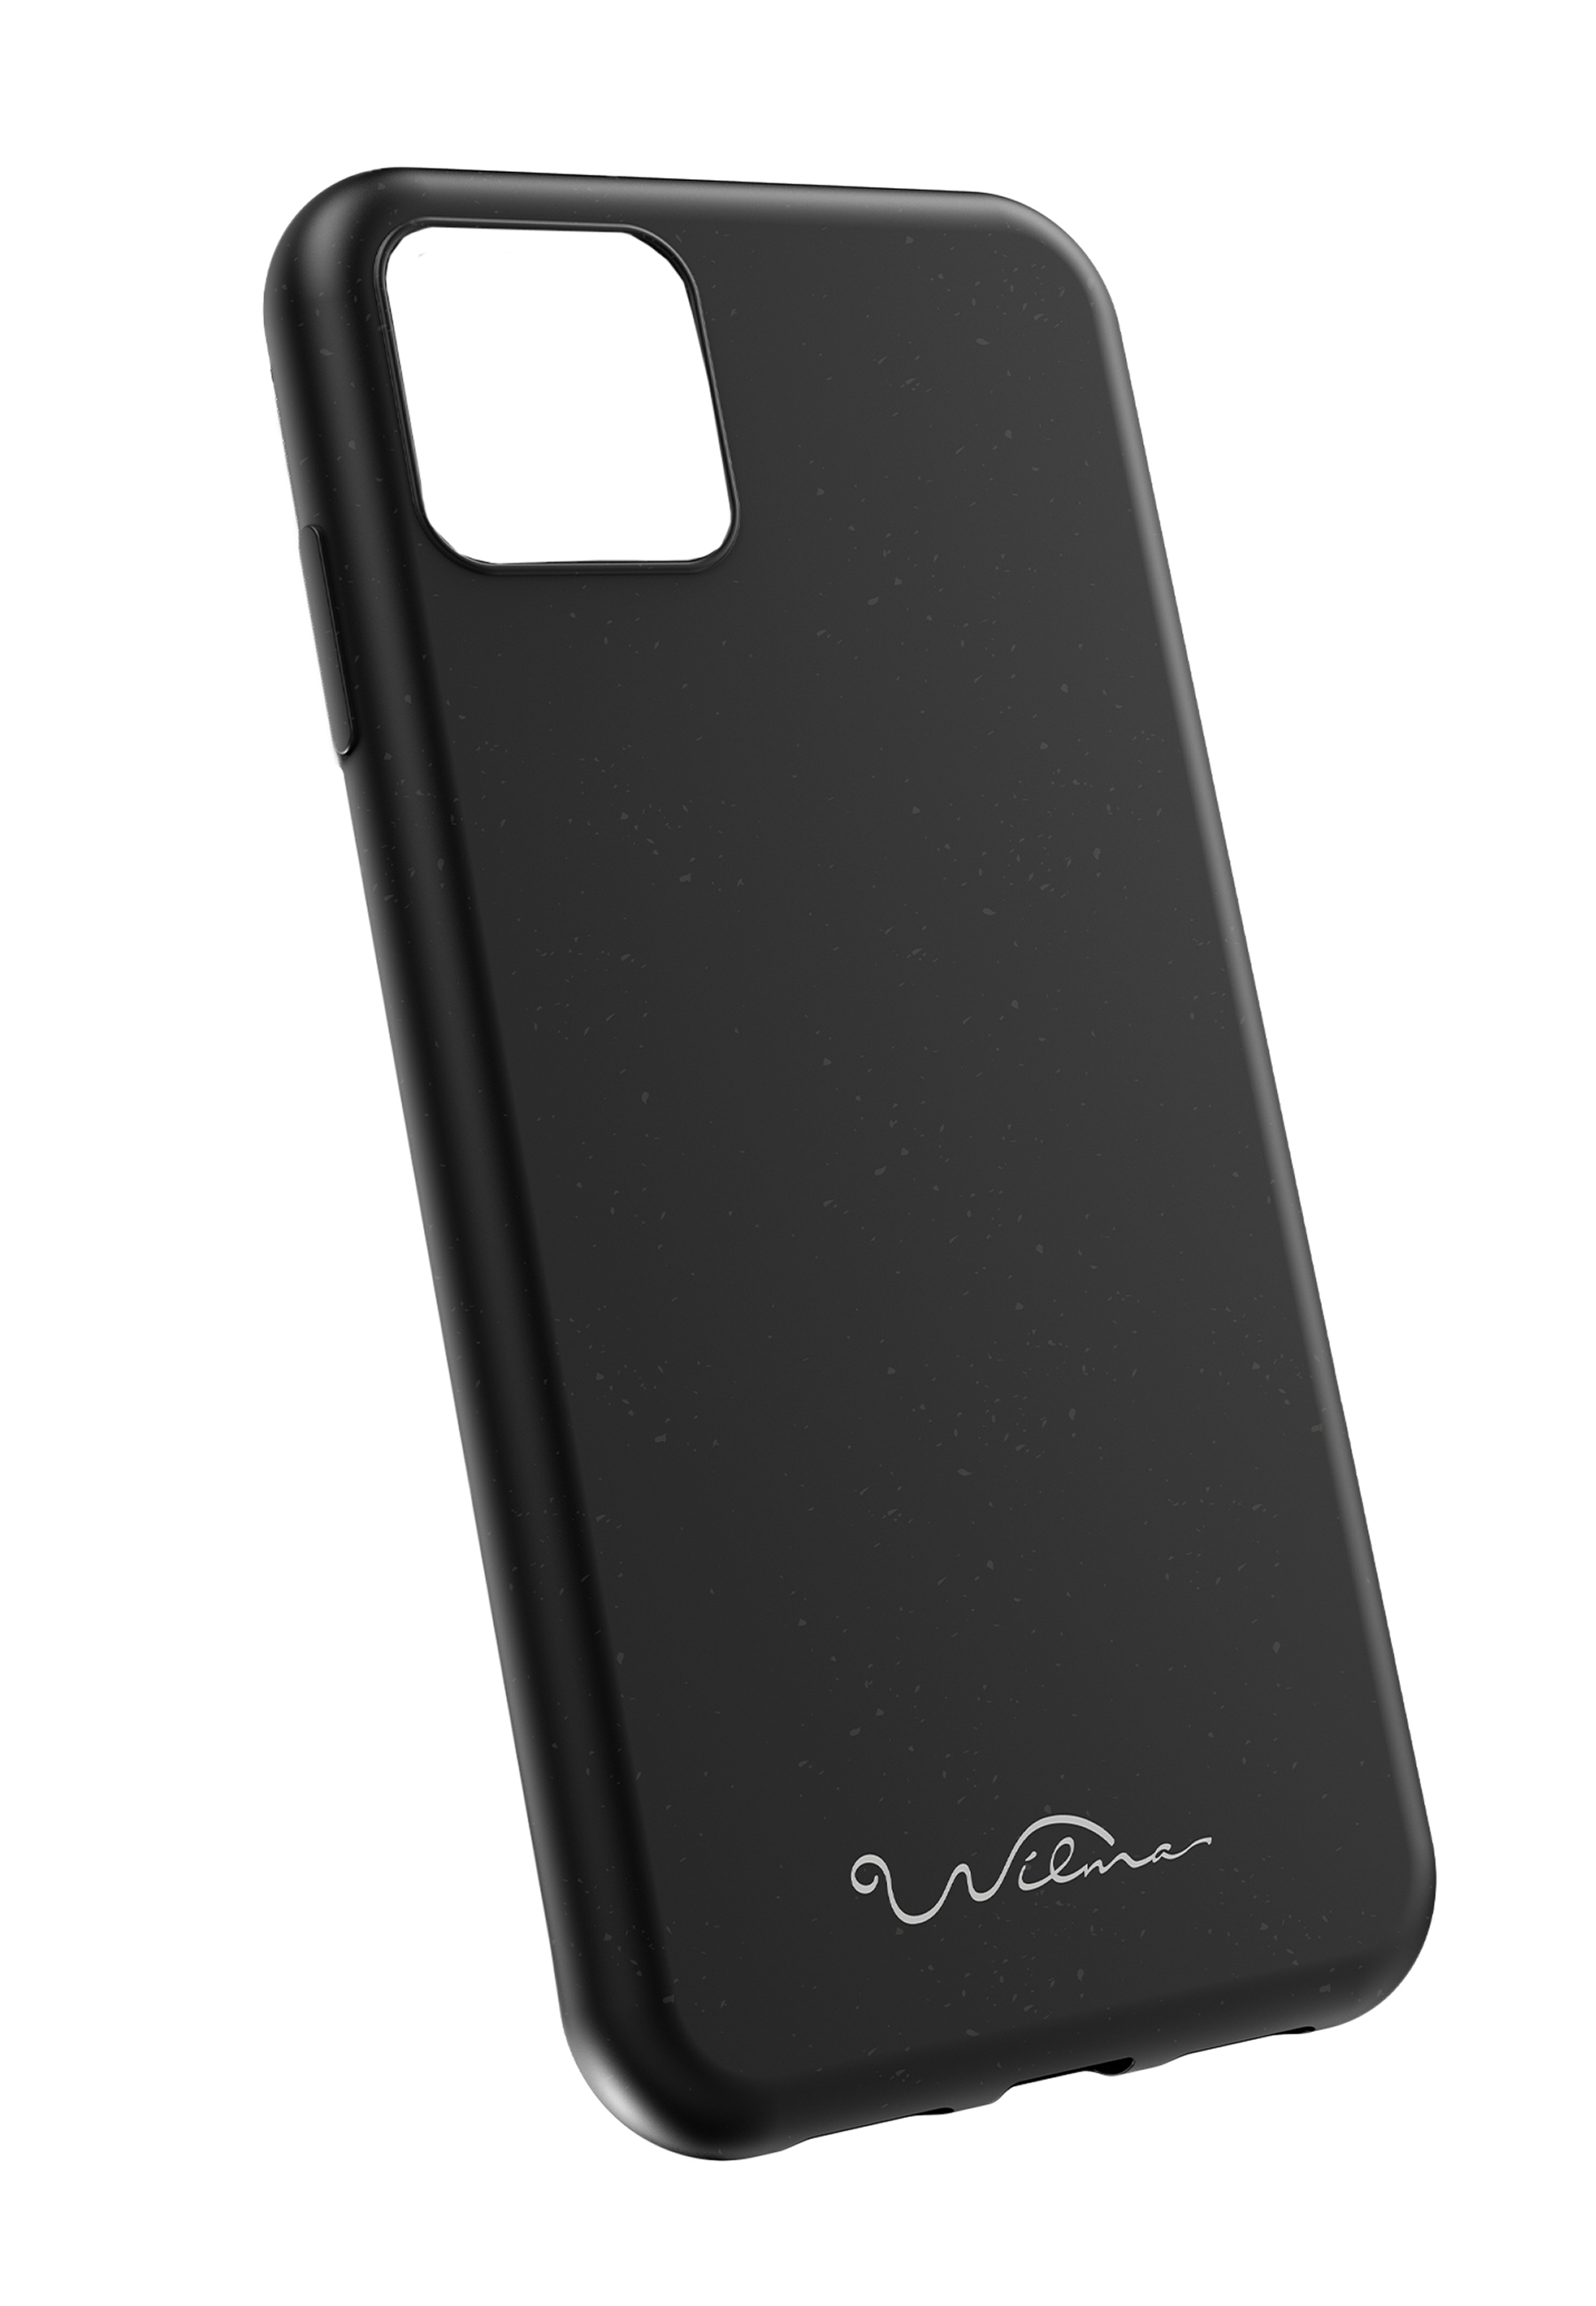 ECO FASHION black BY Apple, WILMA iPhone P11PM, Pro Max, Backcover, 11